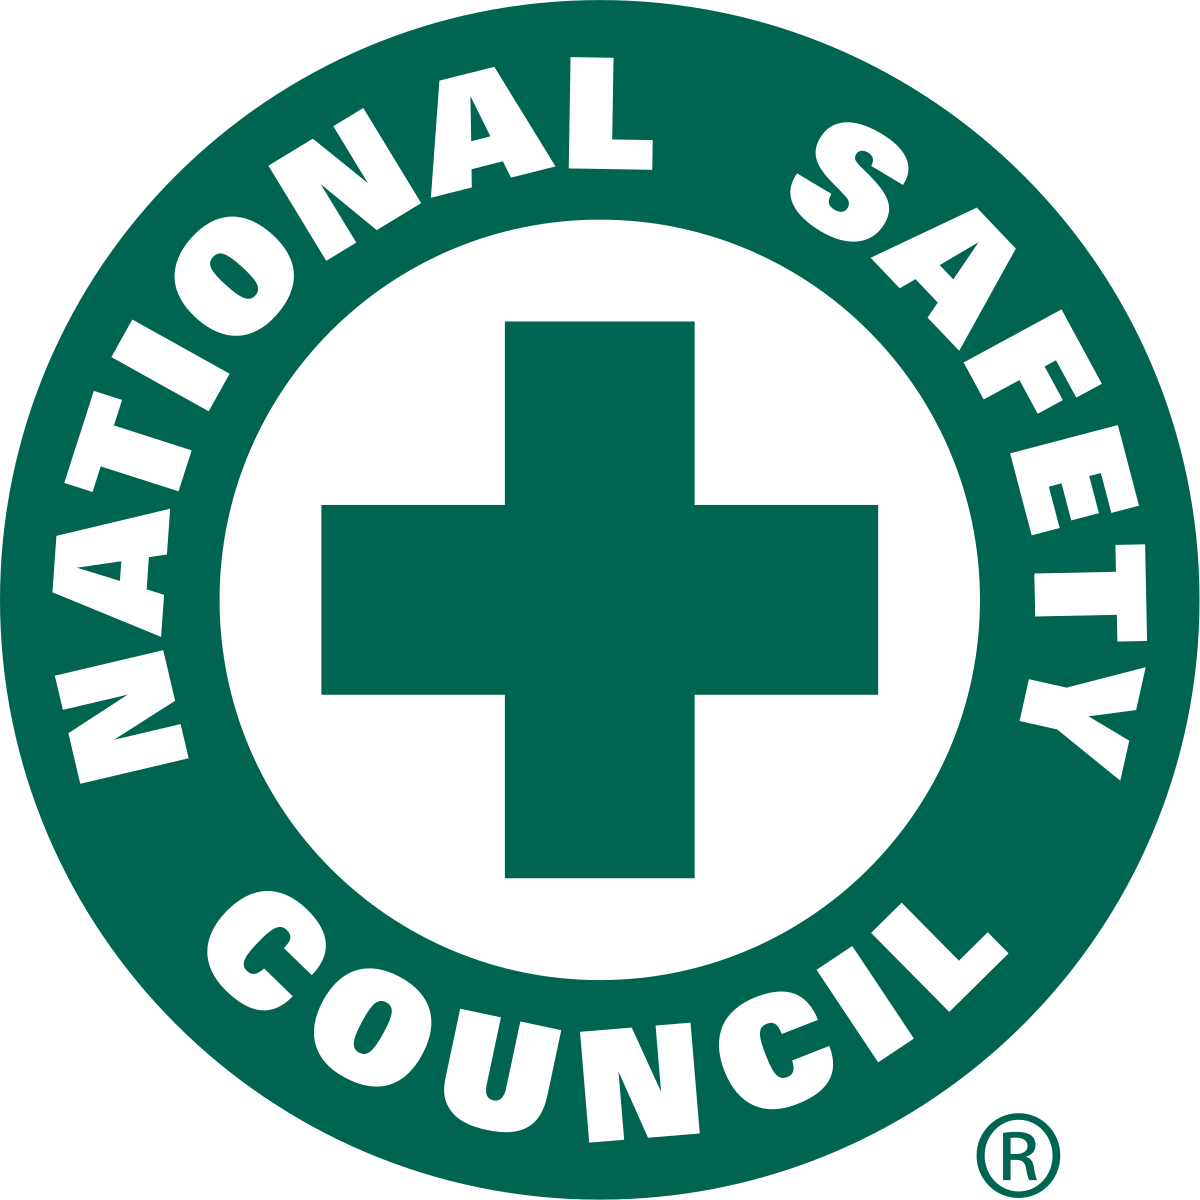 National_Safety_Council.svg.png